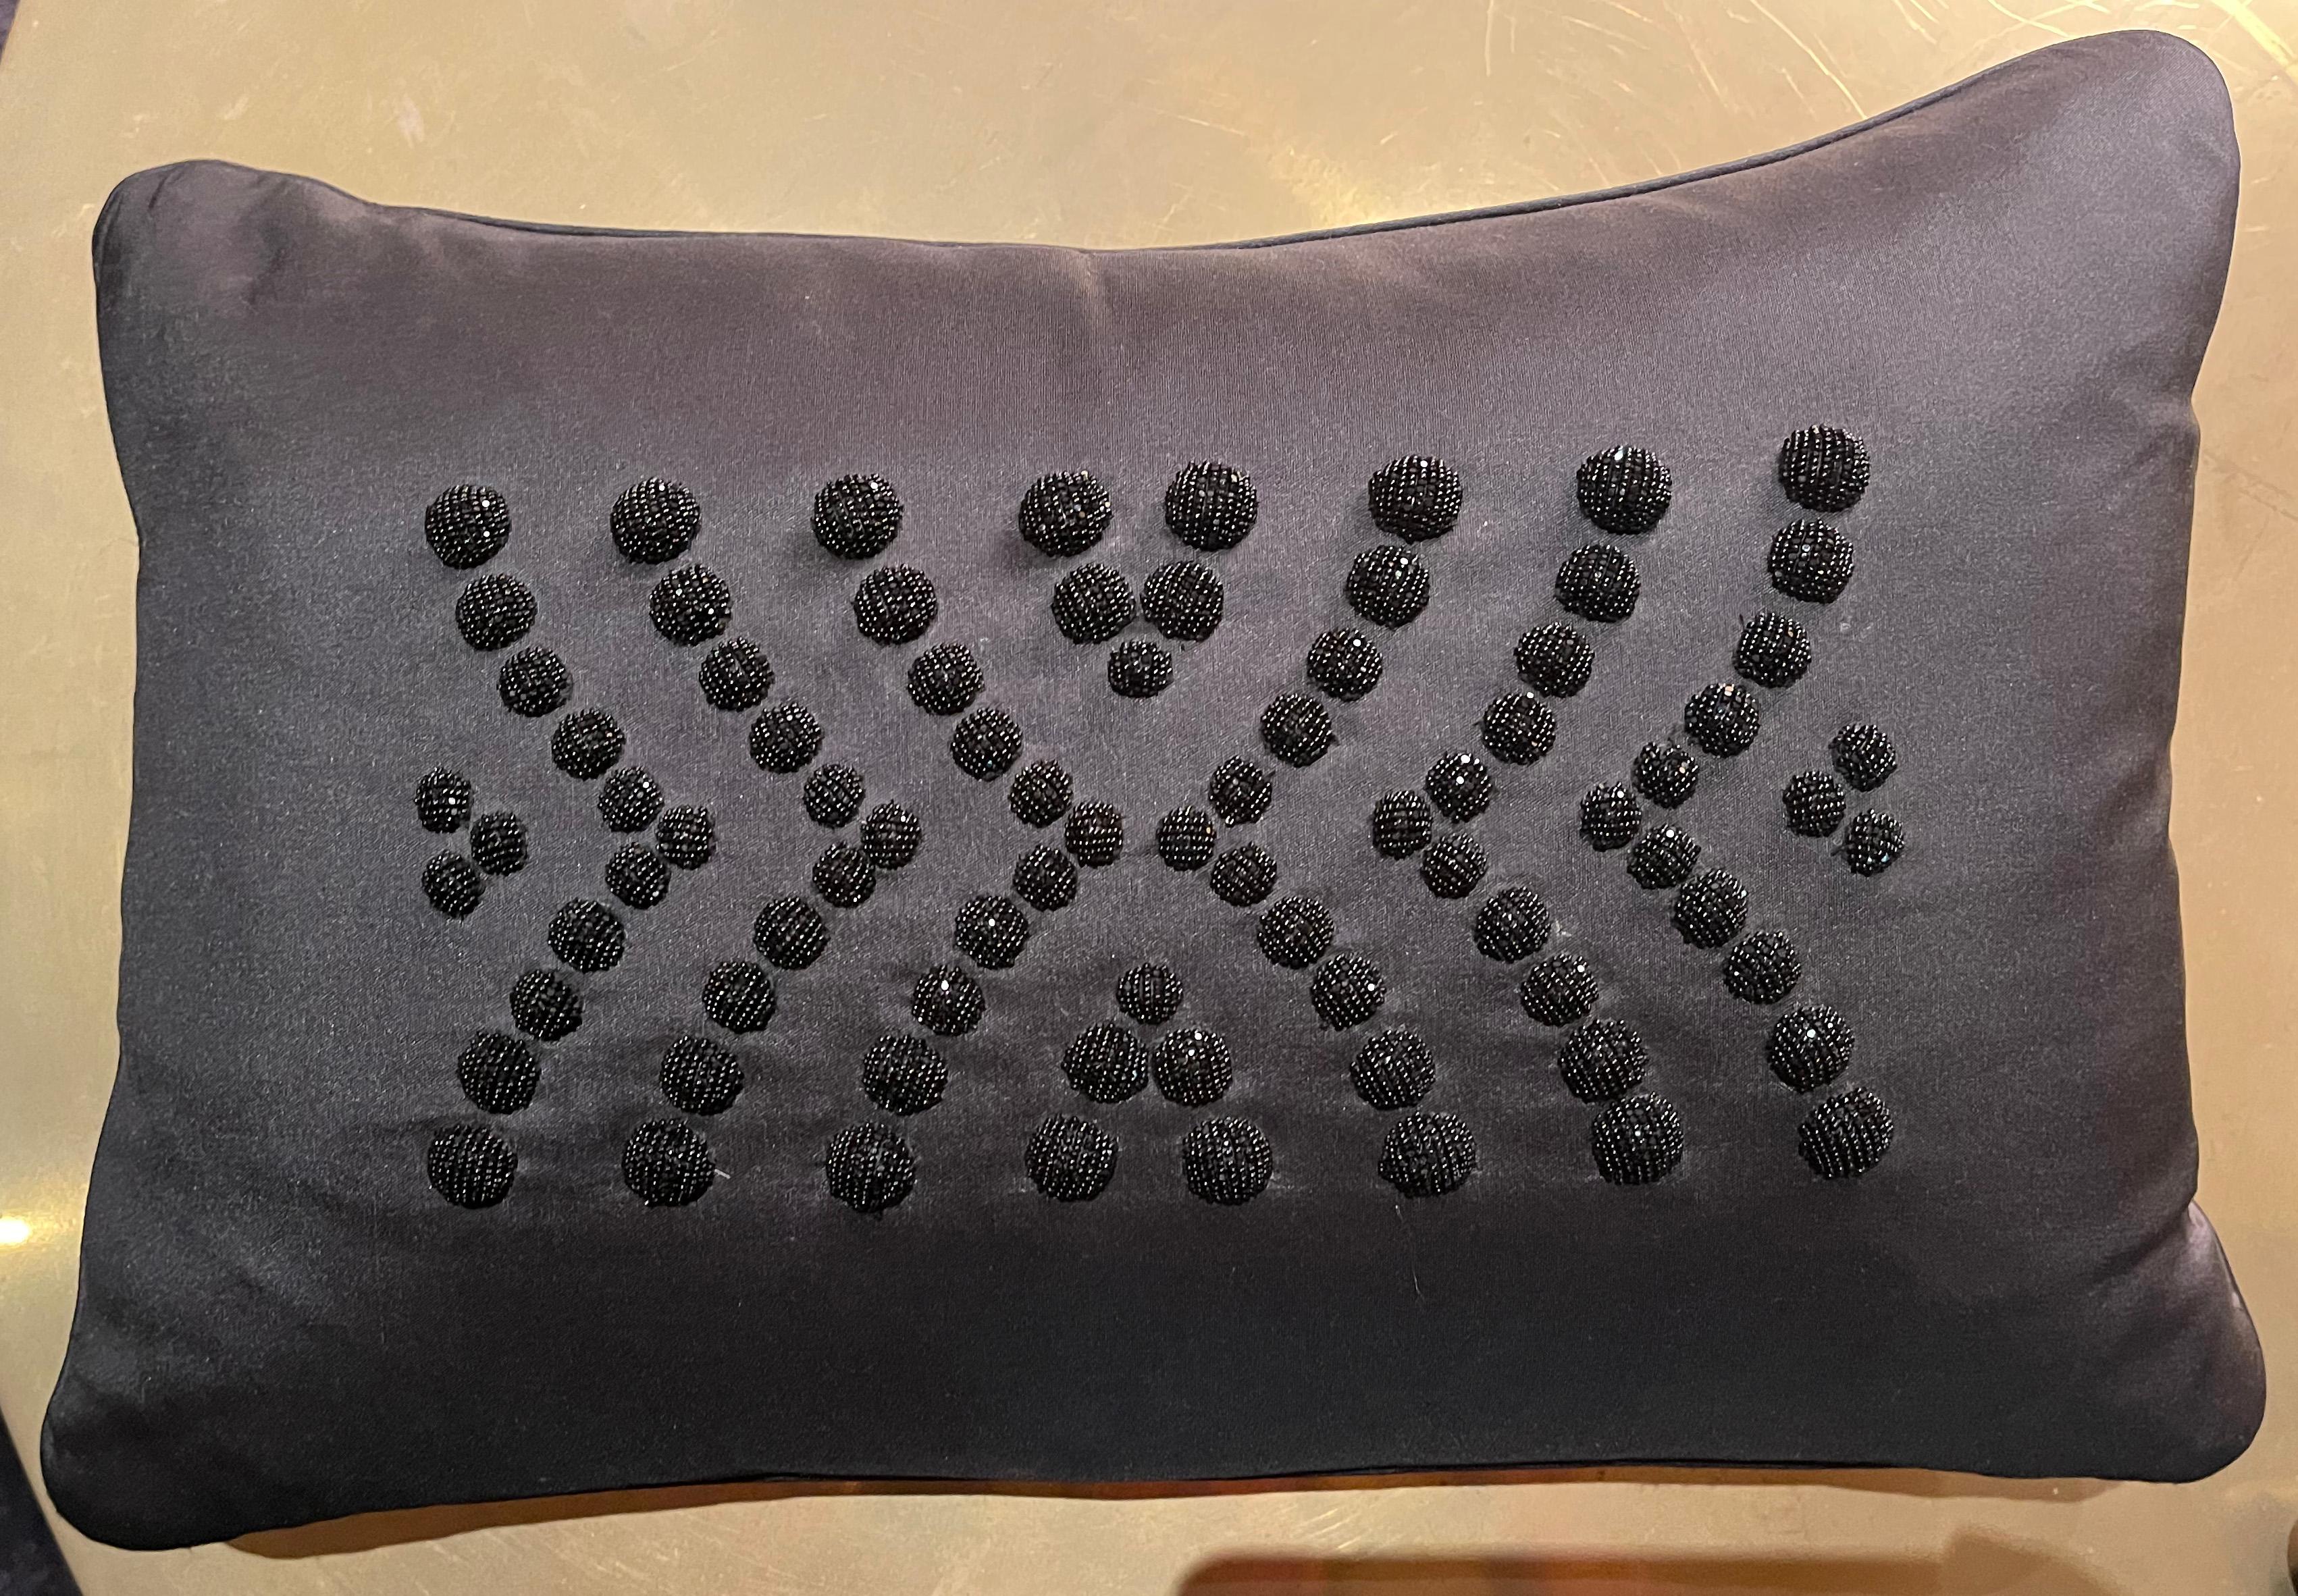 Demi Coutard silk cushion by Lalique

A collaboration between Lady Tina Green & Pietro Mingarelli for Lalique Maison. The Demi Coutardd cushions exemplifies luxury, with the finest craftsmanship which one could describe as 'Haute Couture' for the